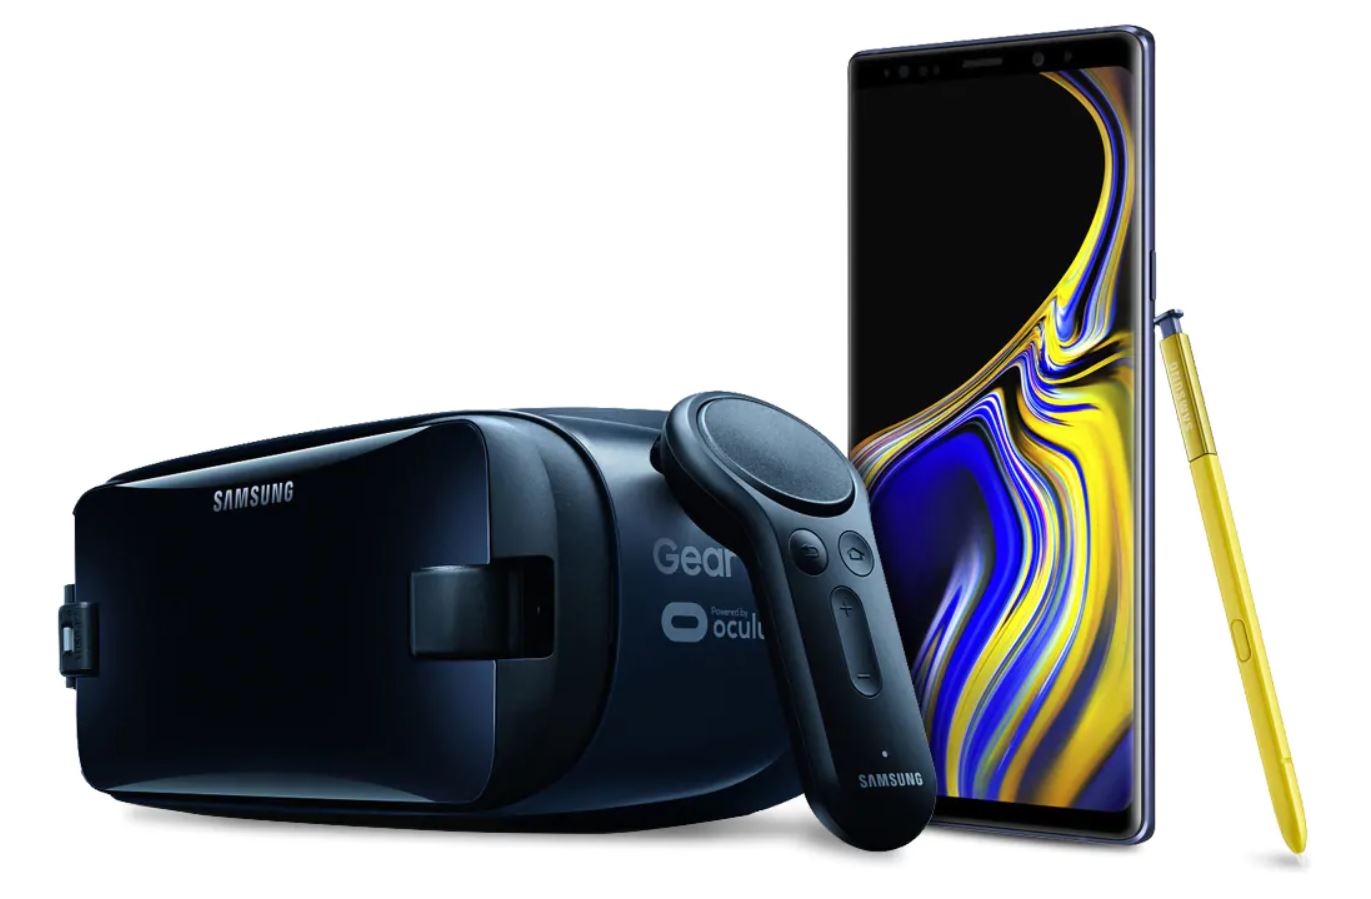 Are S10, S10+, or Note 9 with Gear VR? - 360 Rumors